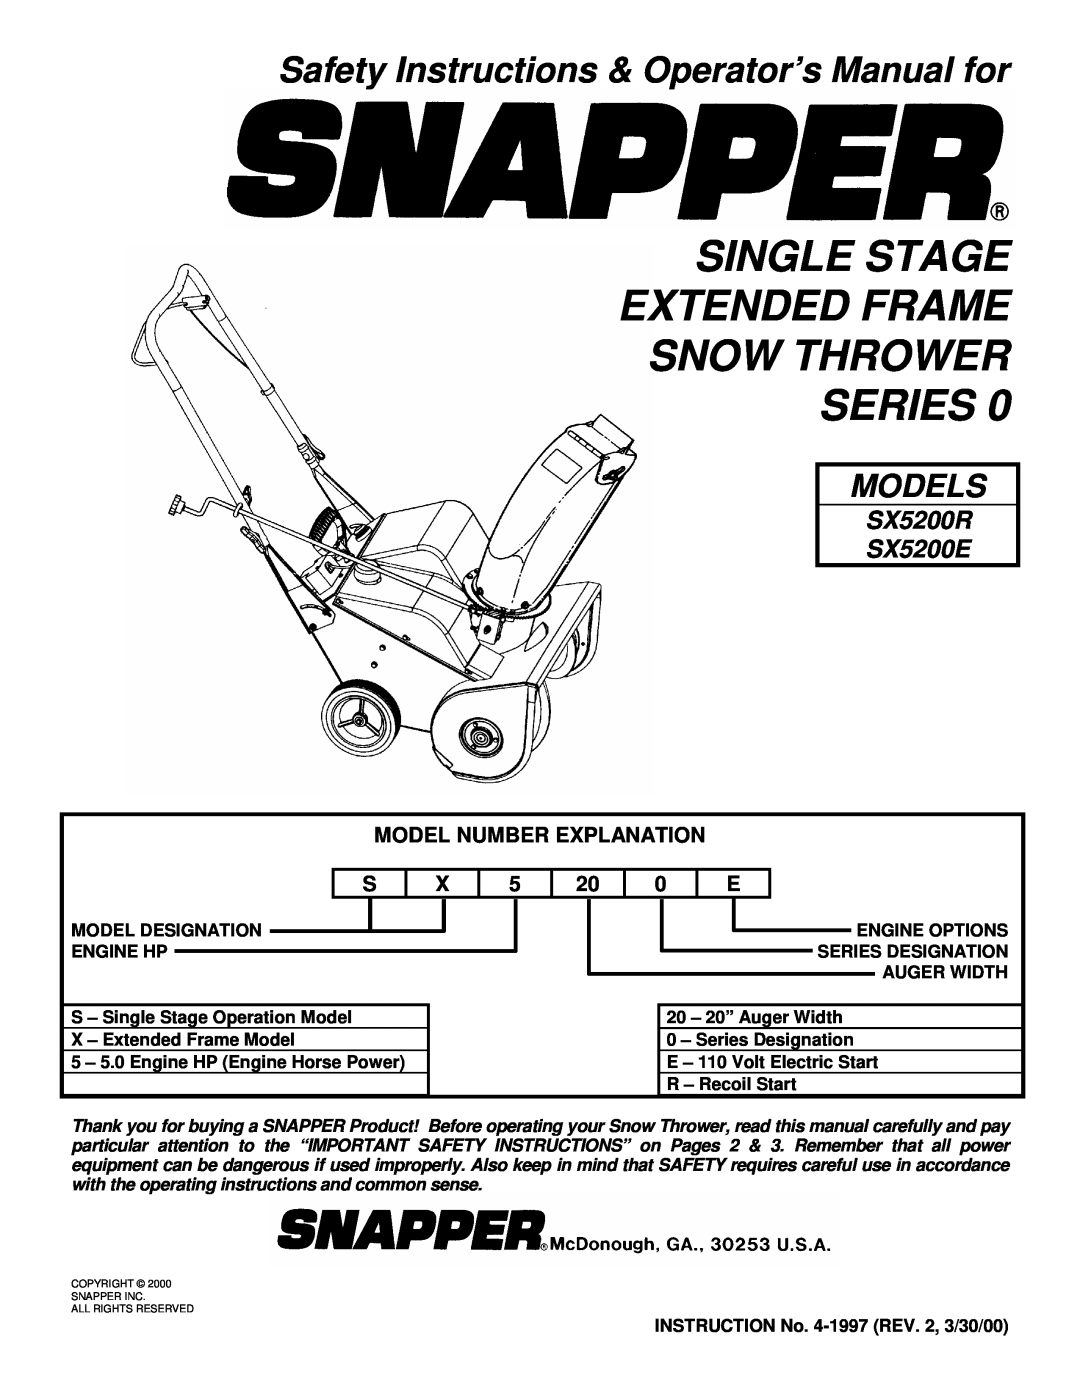 Snapper SX5200R, SX5200E important safety instructions Single Stage Extended Frame Snow Thrower Series, Models 